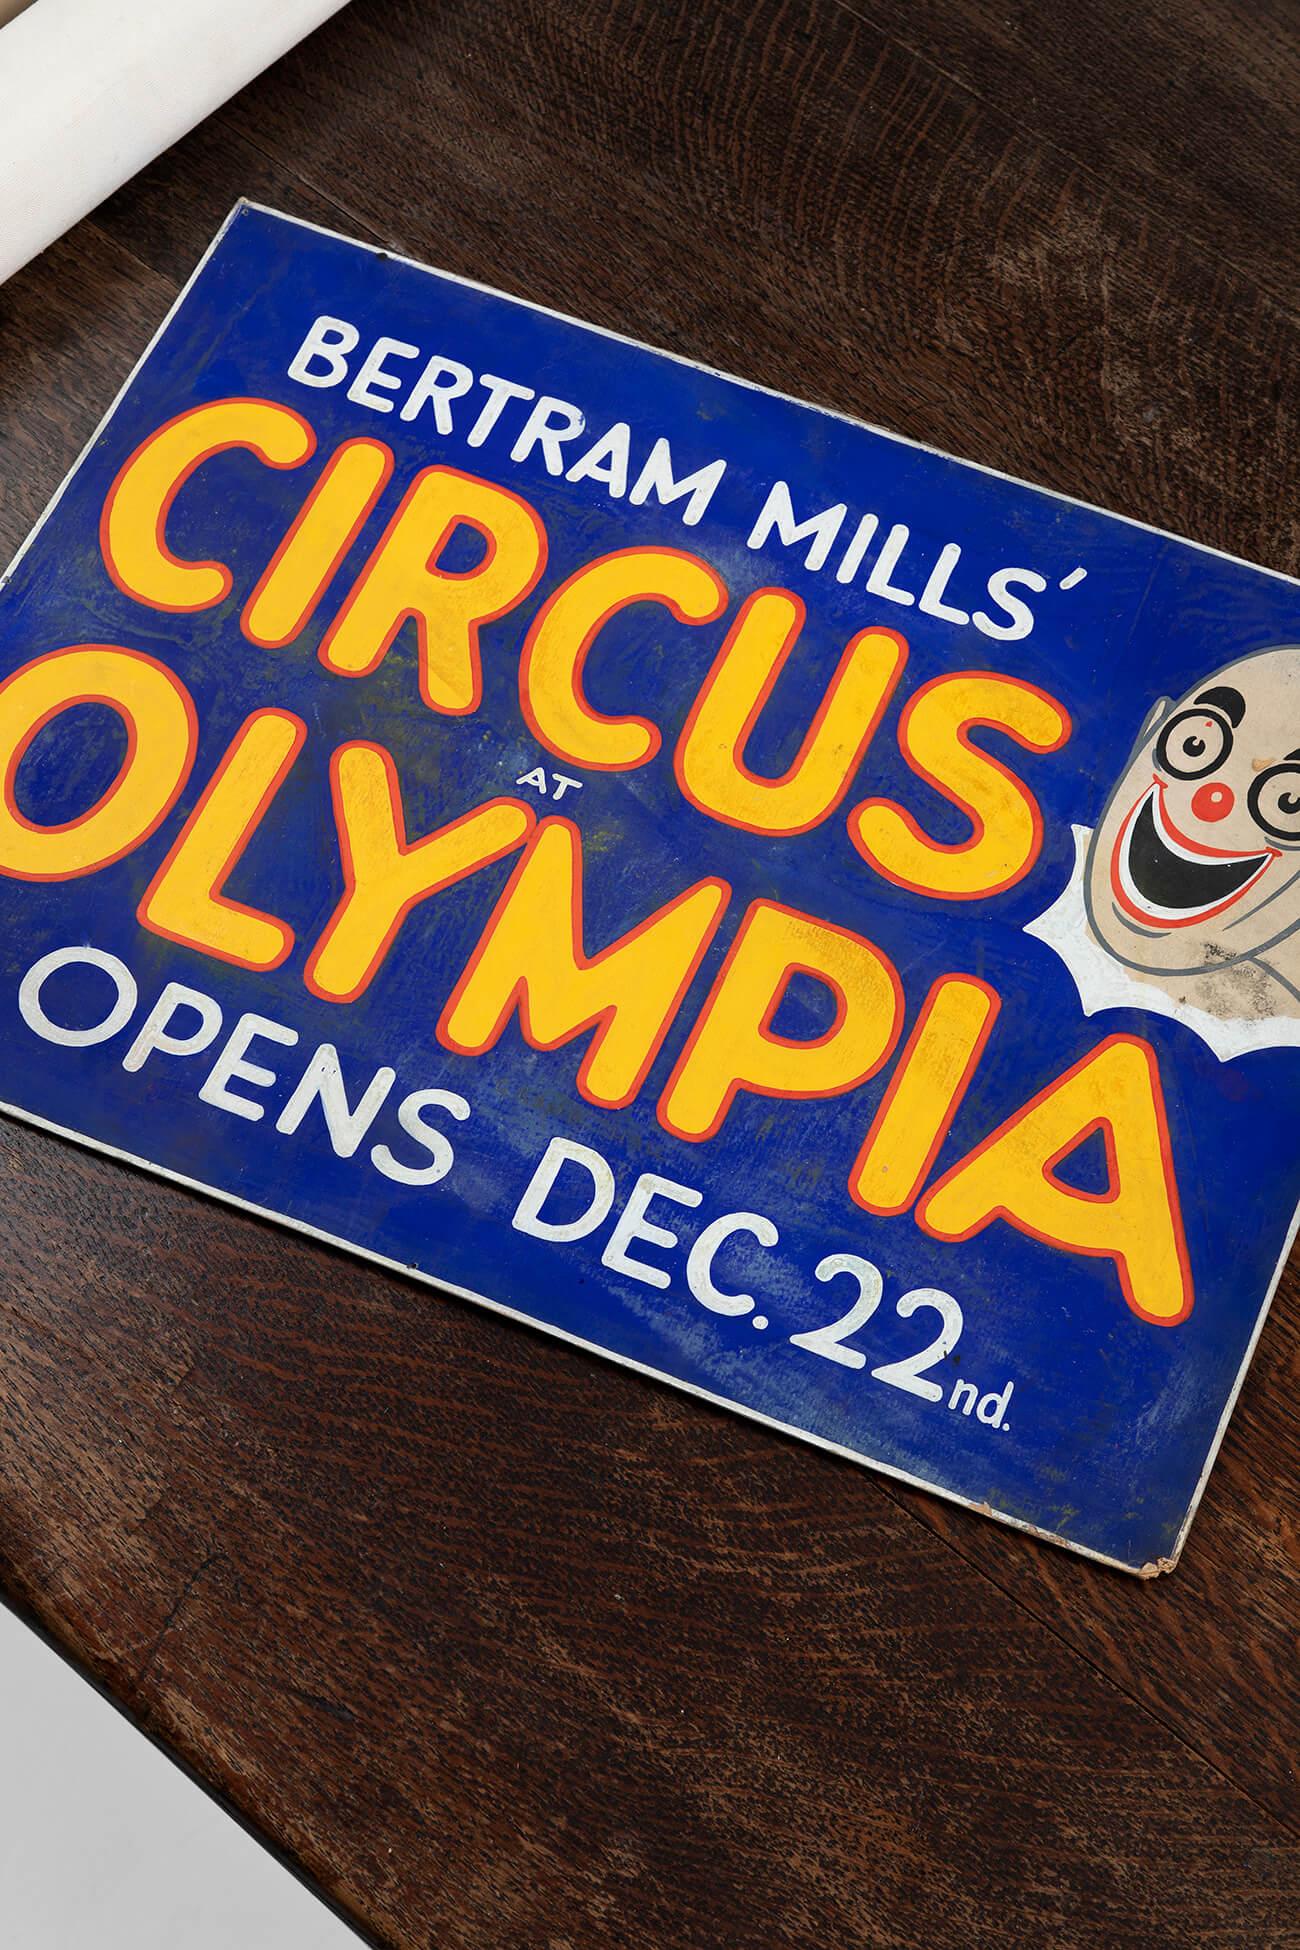 Bertram Mills’ Circus at Olympia Opens Dec 22nd’. Exceptional colour and design. Bradford-based W. E. Berry Ltd was one of the leading producers and printers of film posters in the United Kingdom from the 1920s. Collections of their works are held